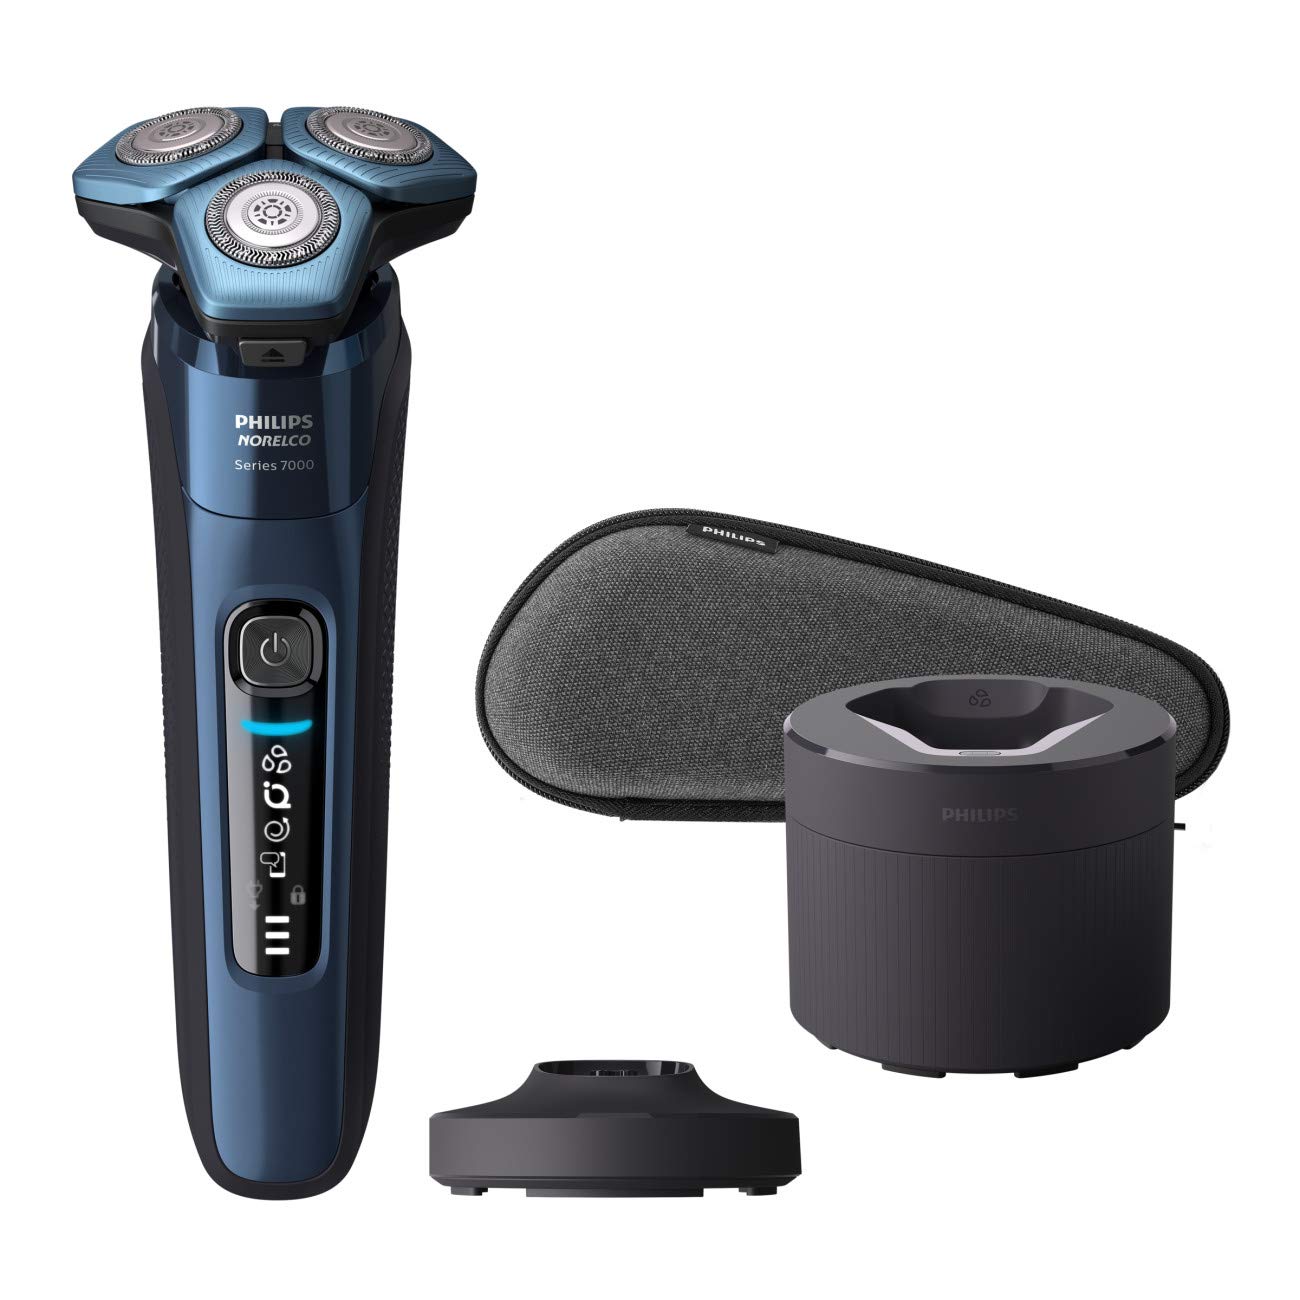 Philips Norelco Shaver 7700, Rechargeable Wet & Dry Electric